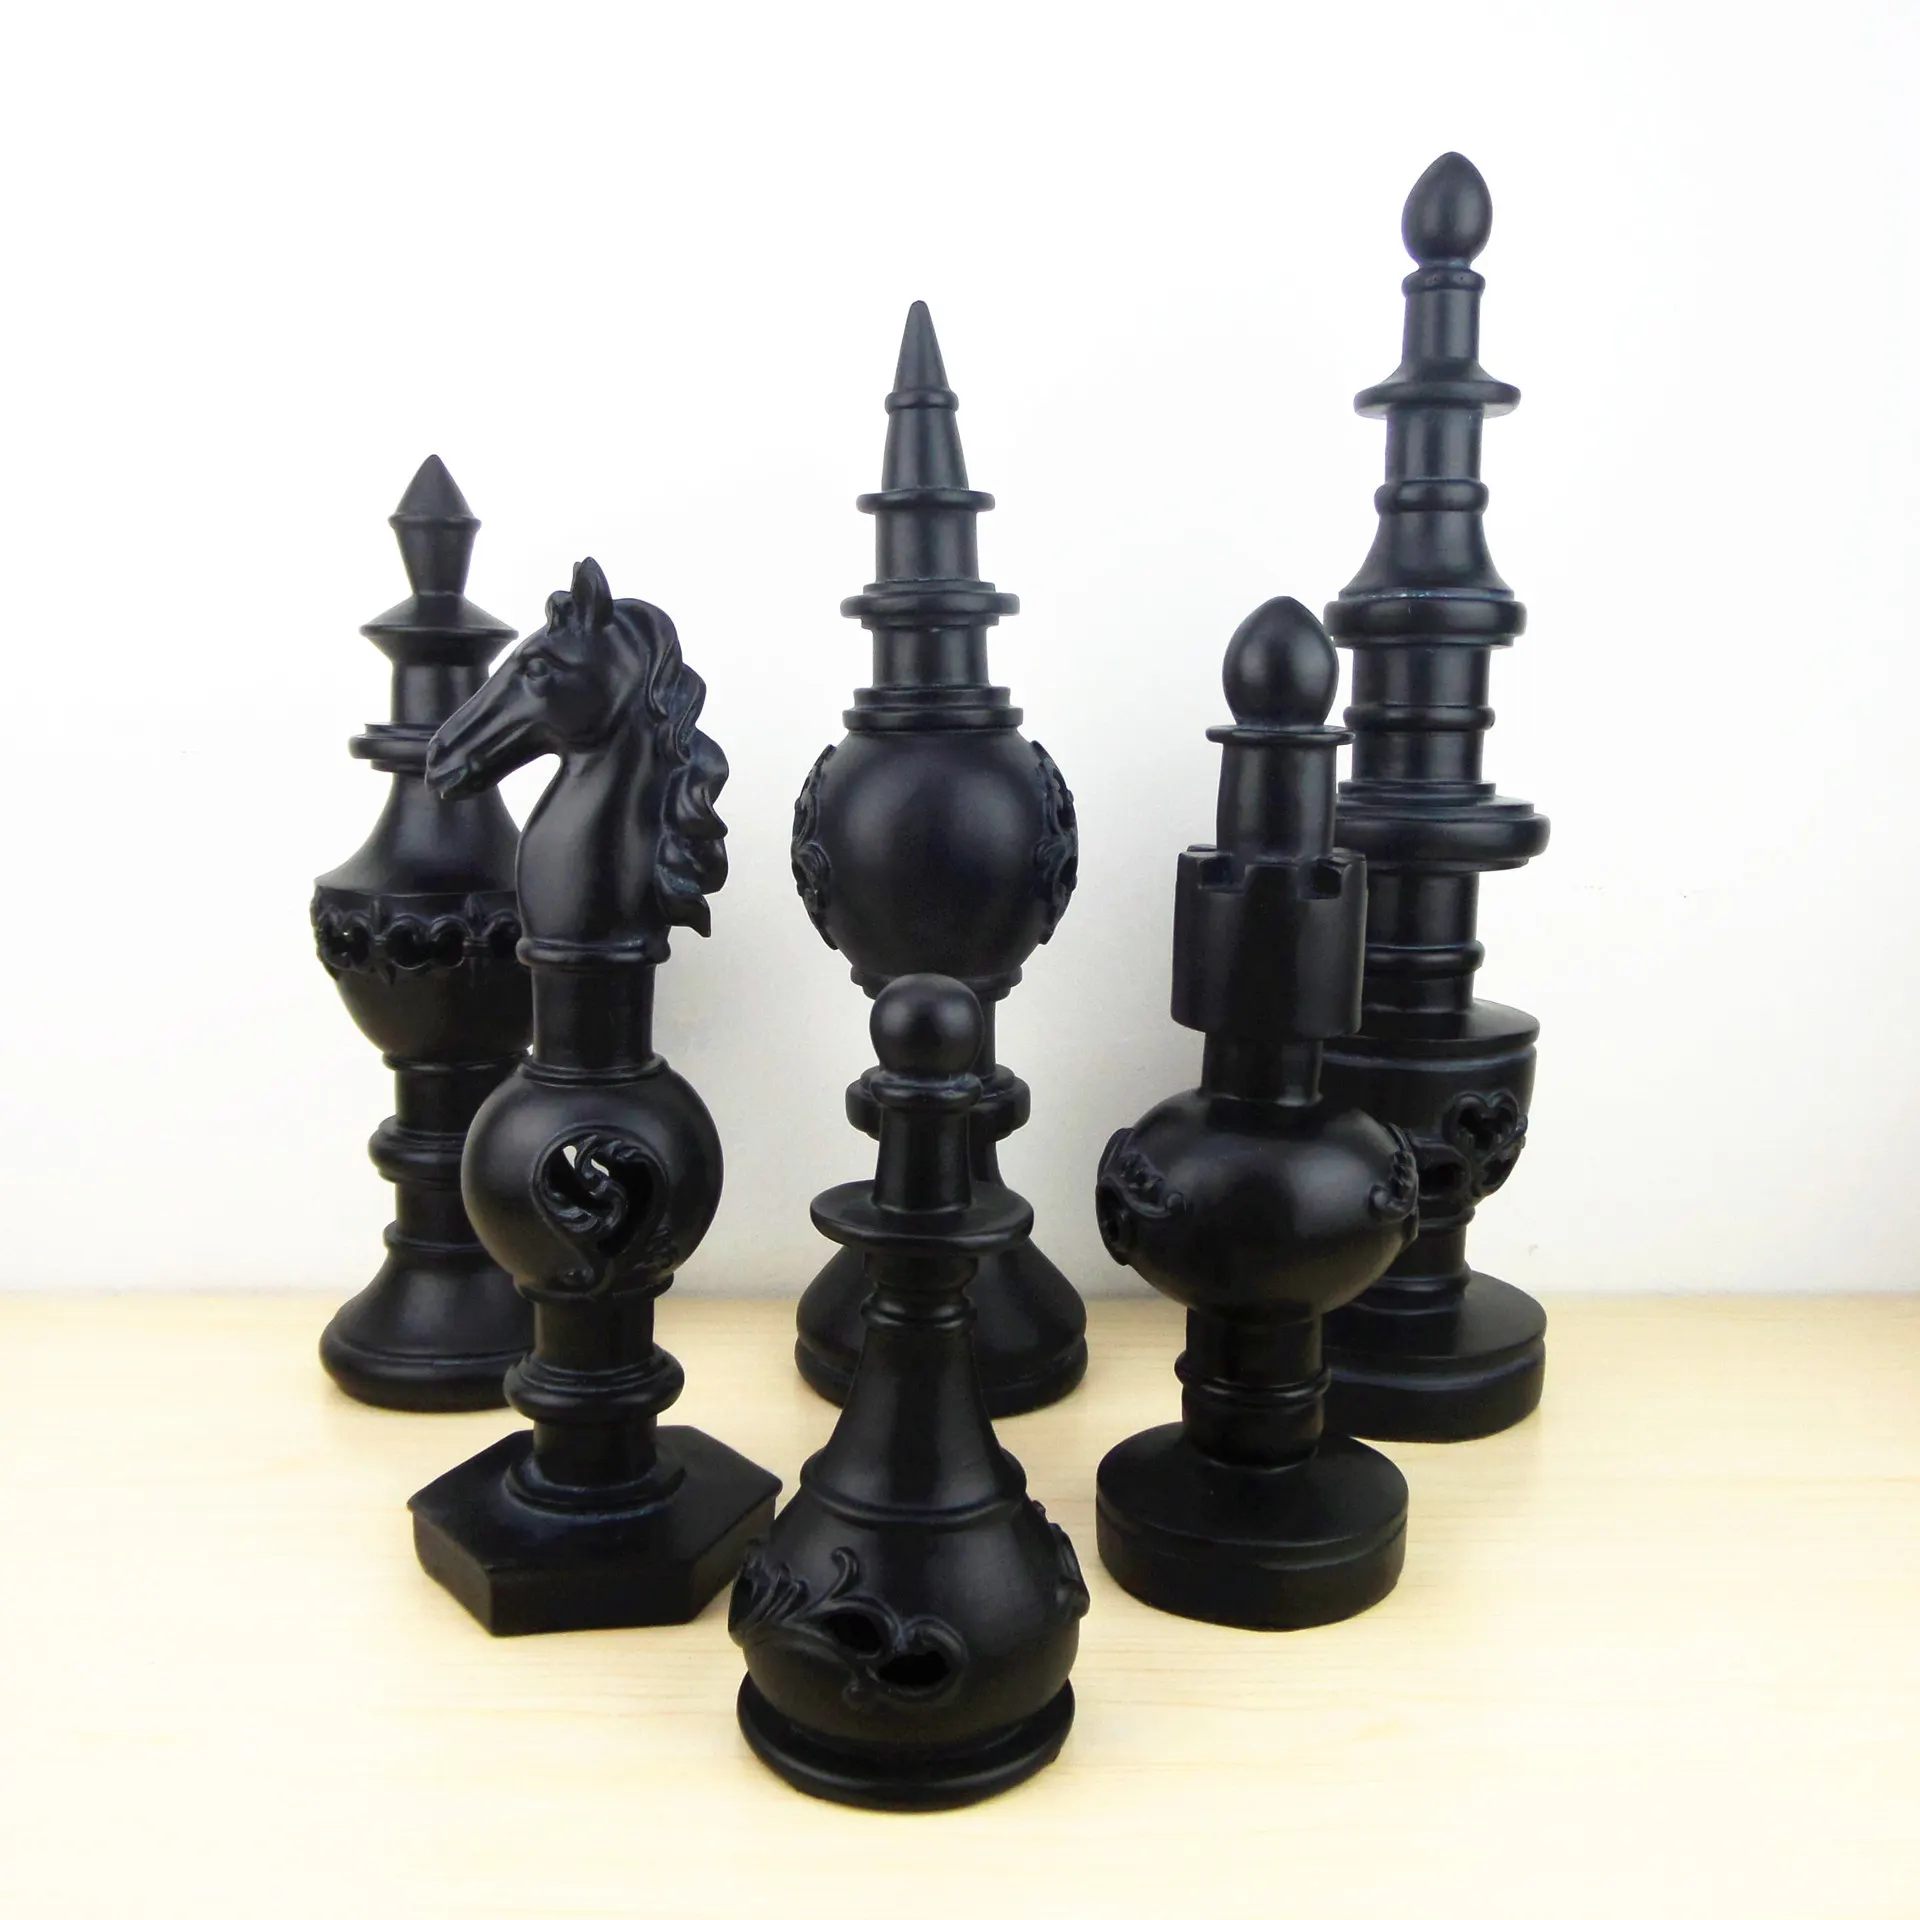 Chess decoration six-piece creative European-style home decoration resin crafts